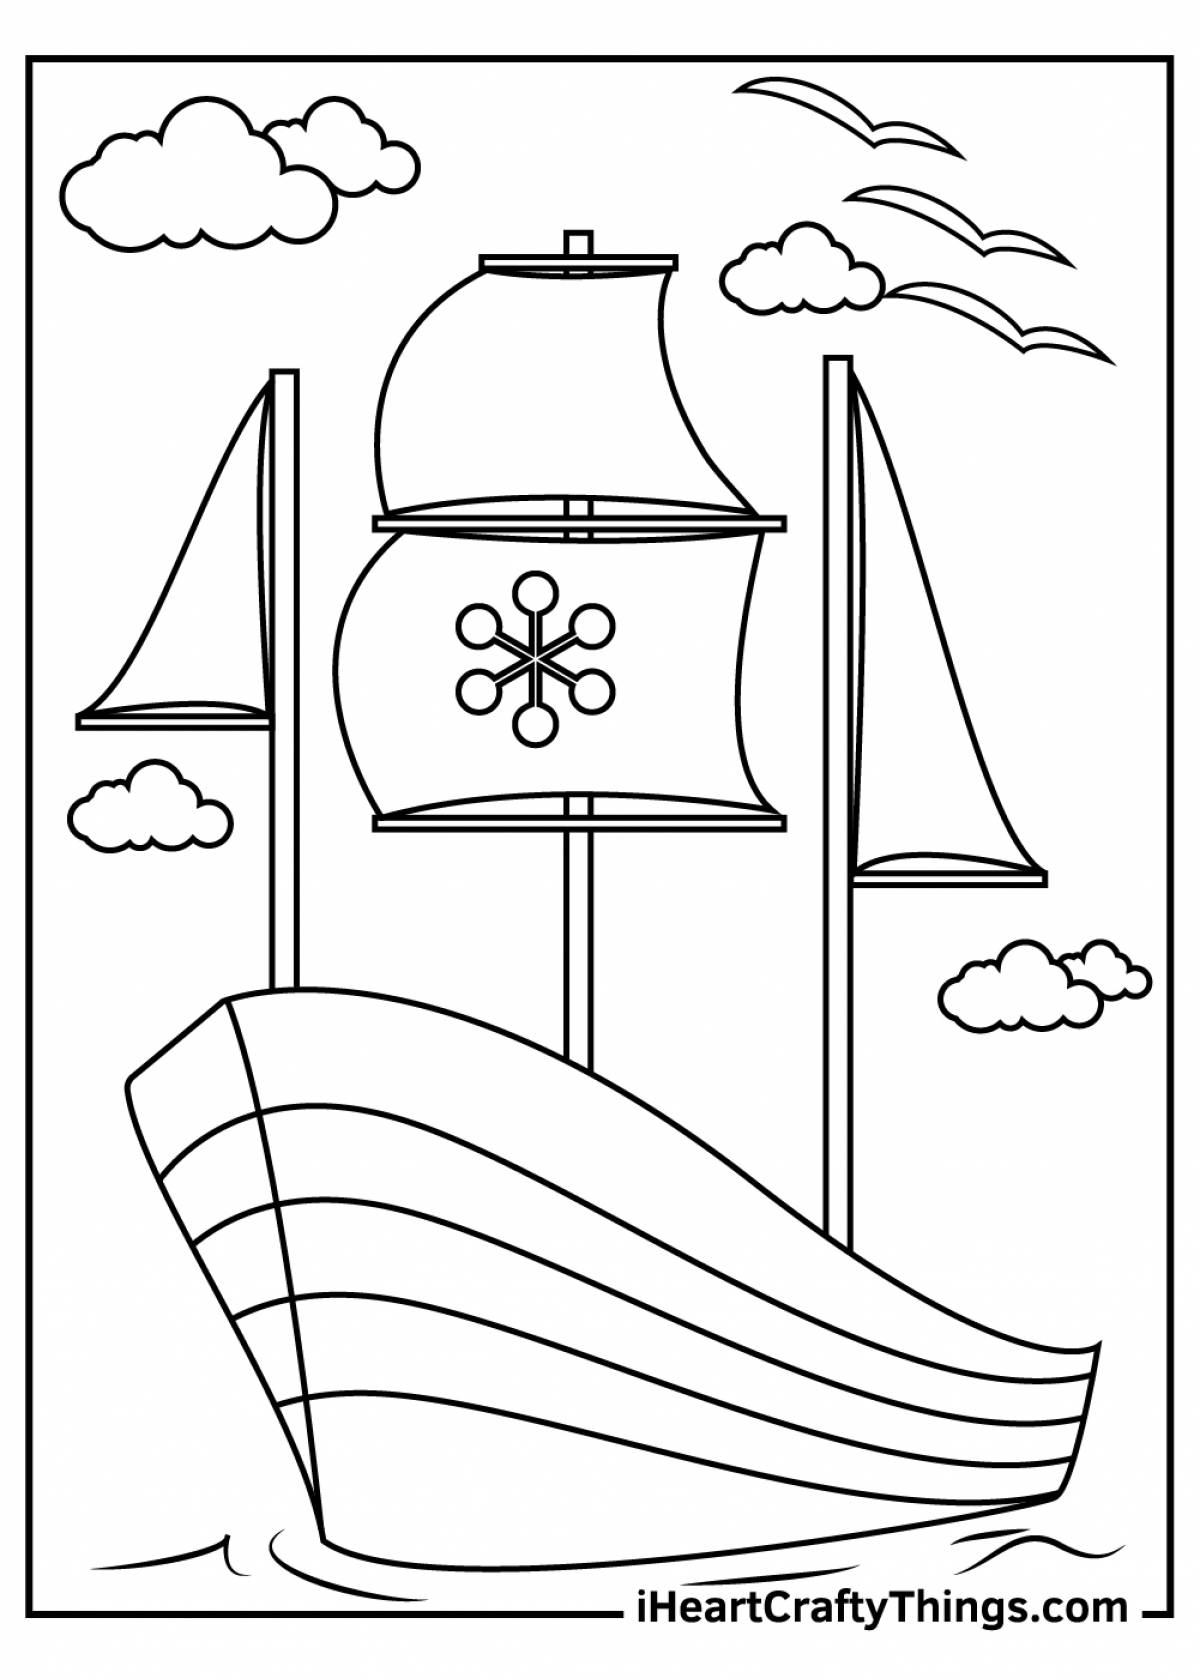 Living boat coloring for children 6-7 years old